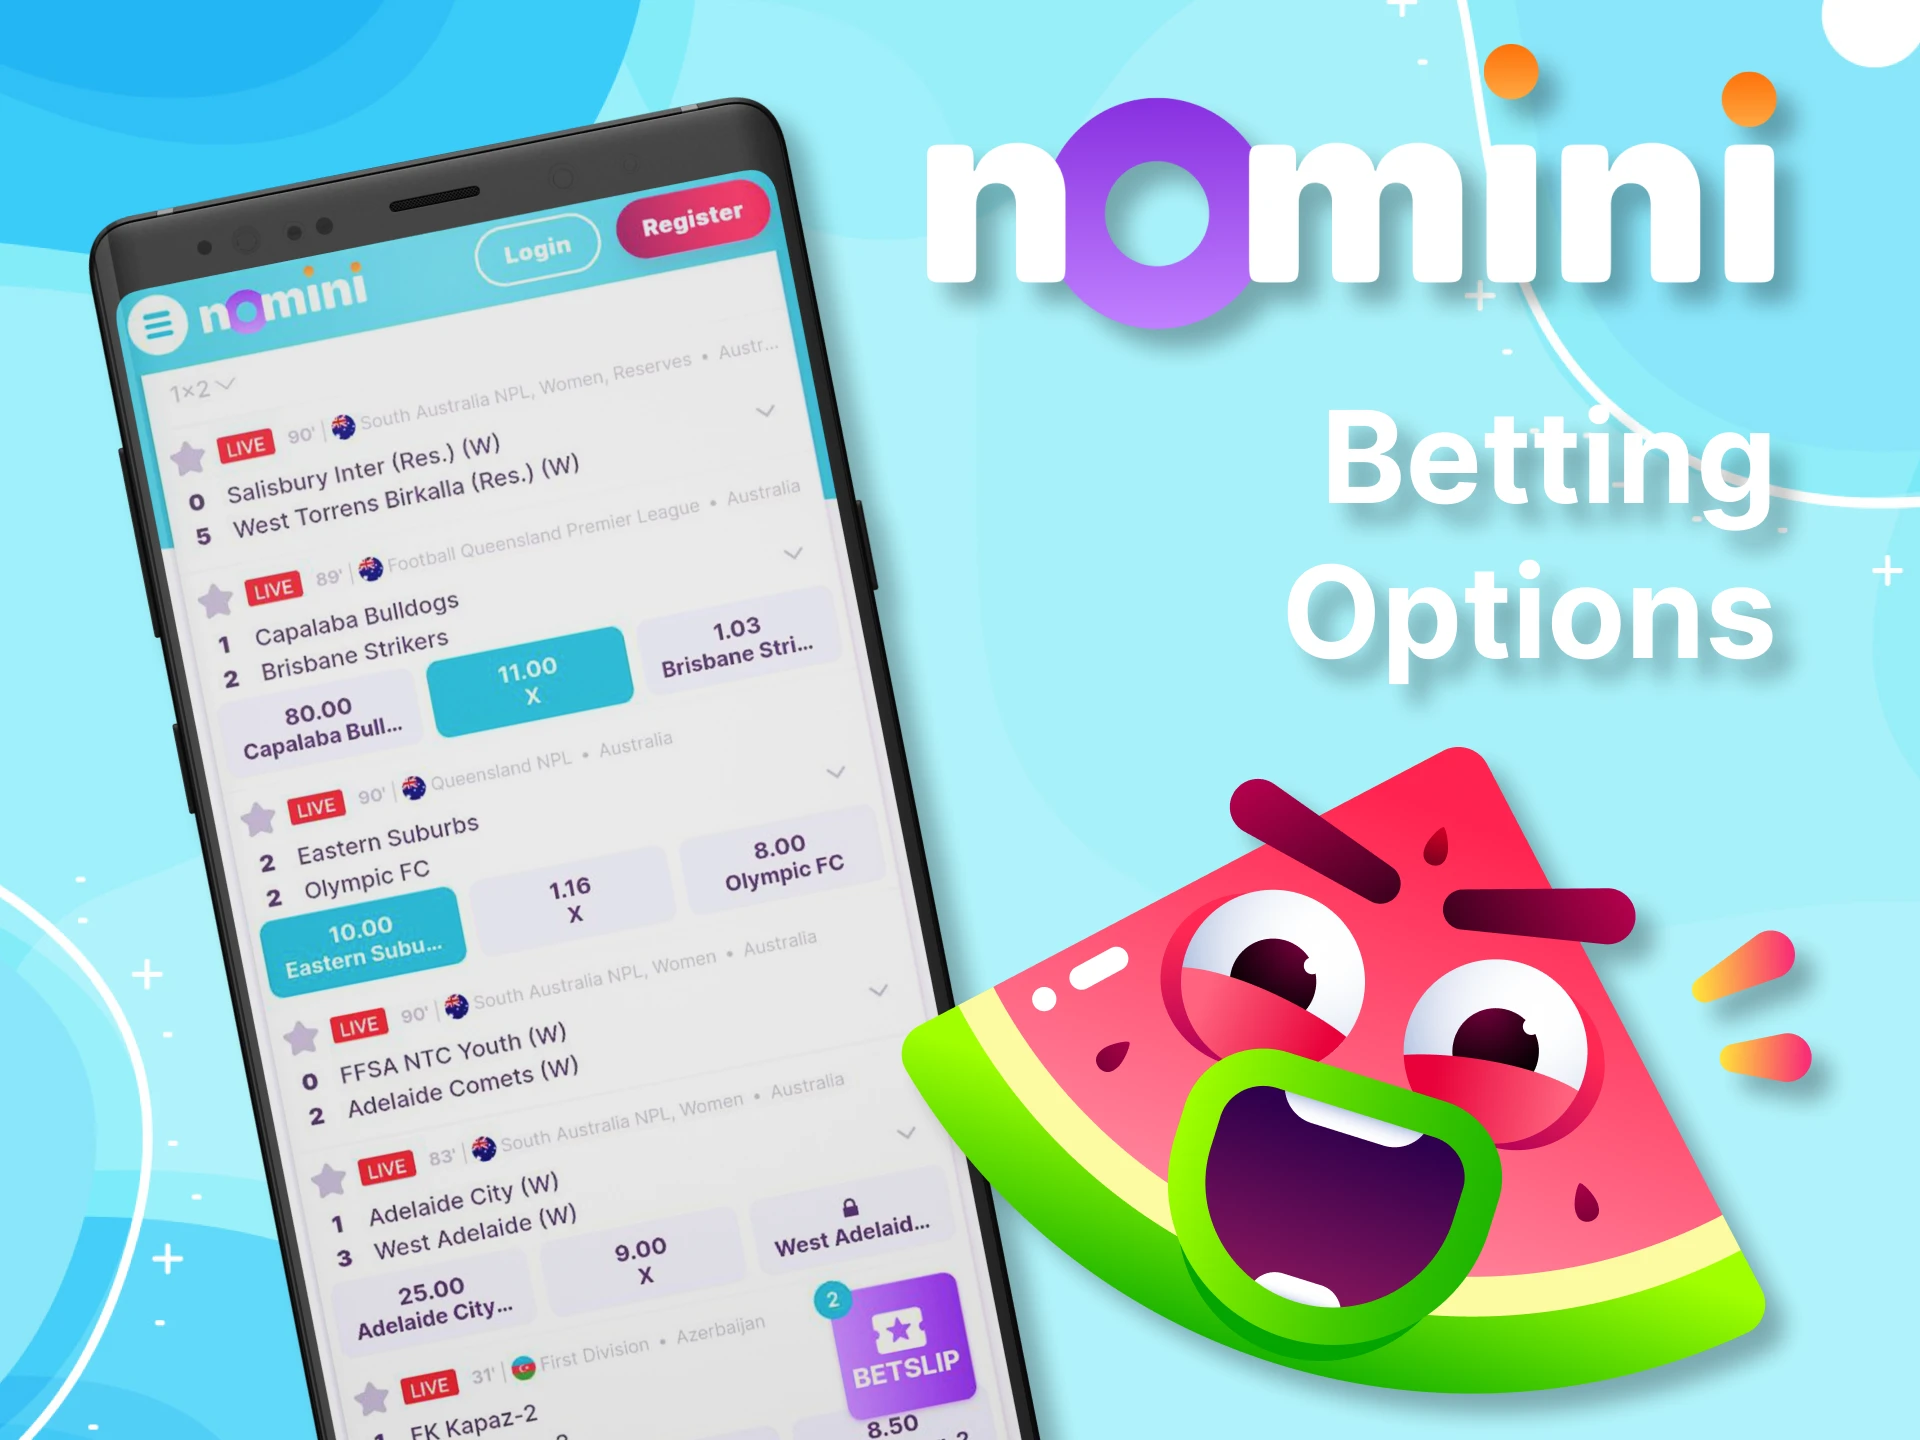 The Nomini app has various options for betting on all kinds of sports.